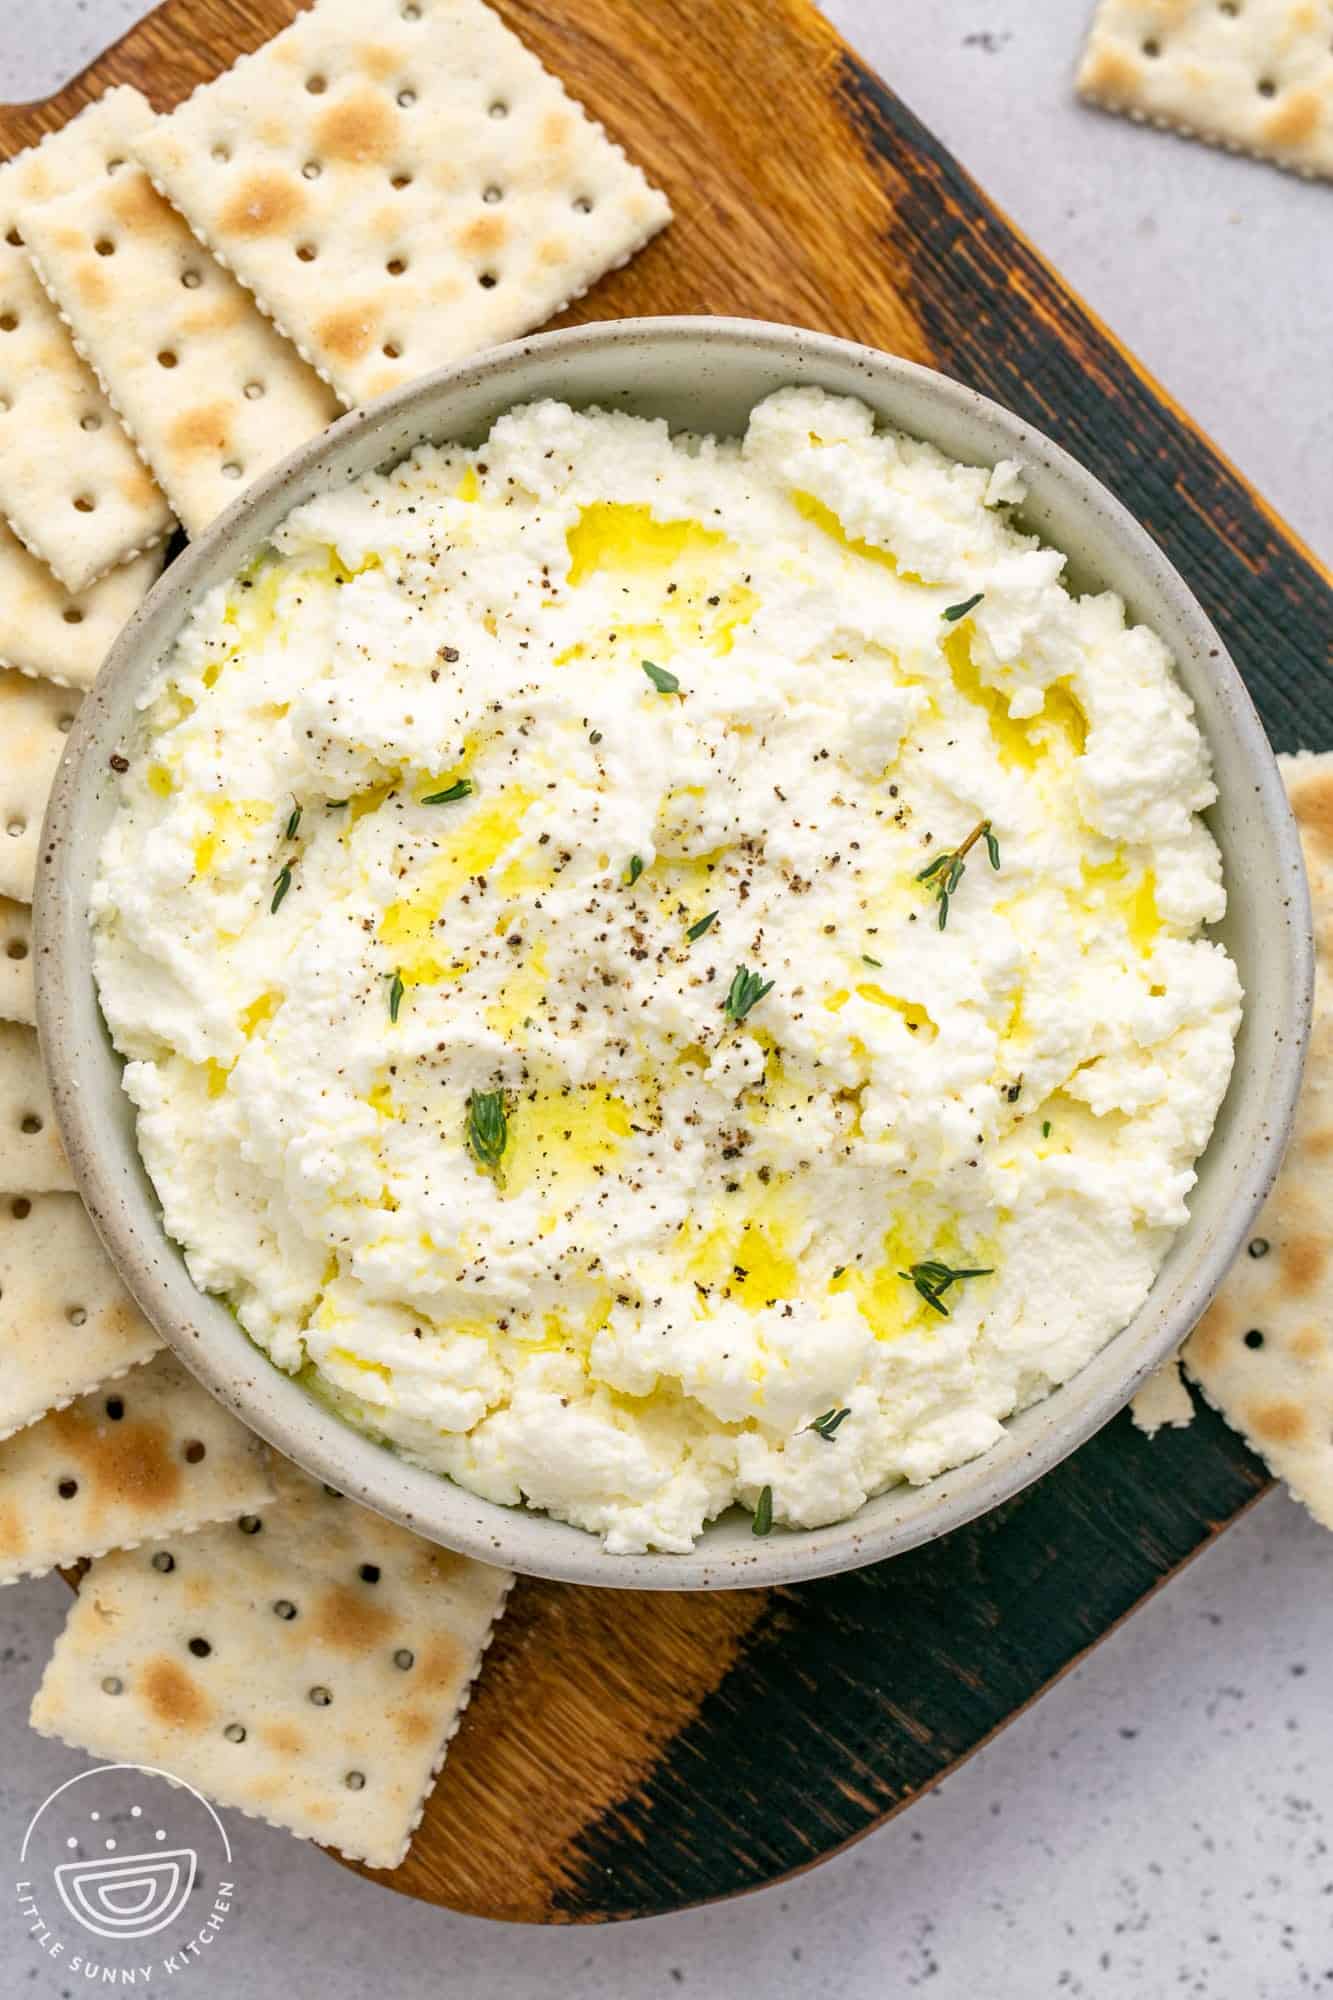 a gray bowl filled with ricotta cheese that has been drizzled with olive oil and sprinkled with pepper and fresh herbs. The bowl is on a wooden board, with saltine crackers around it.